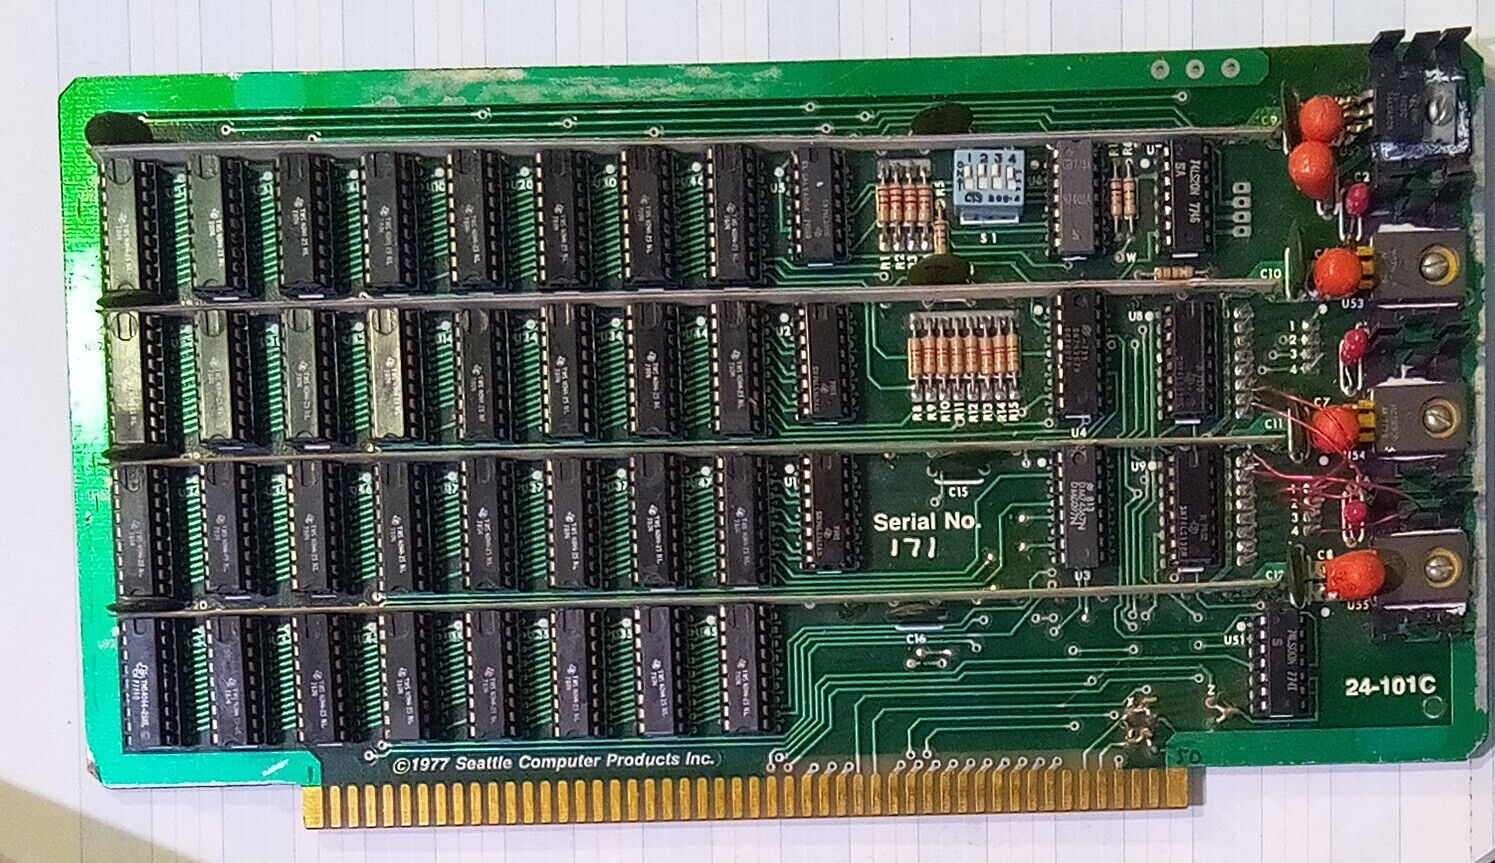 Vintage Seattle Computer Products 16K RAM  S-100 Board    Part # 24-101C @1977